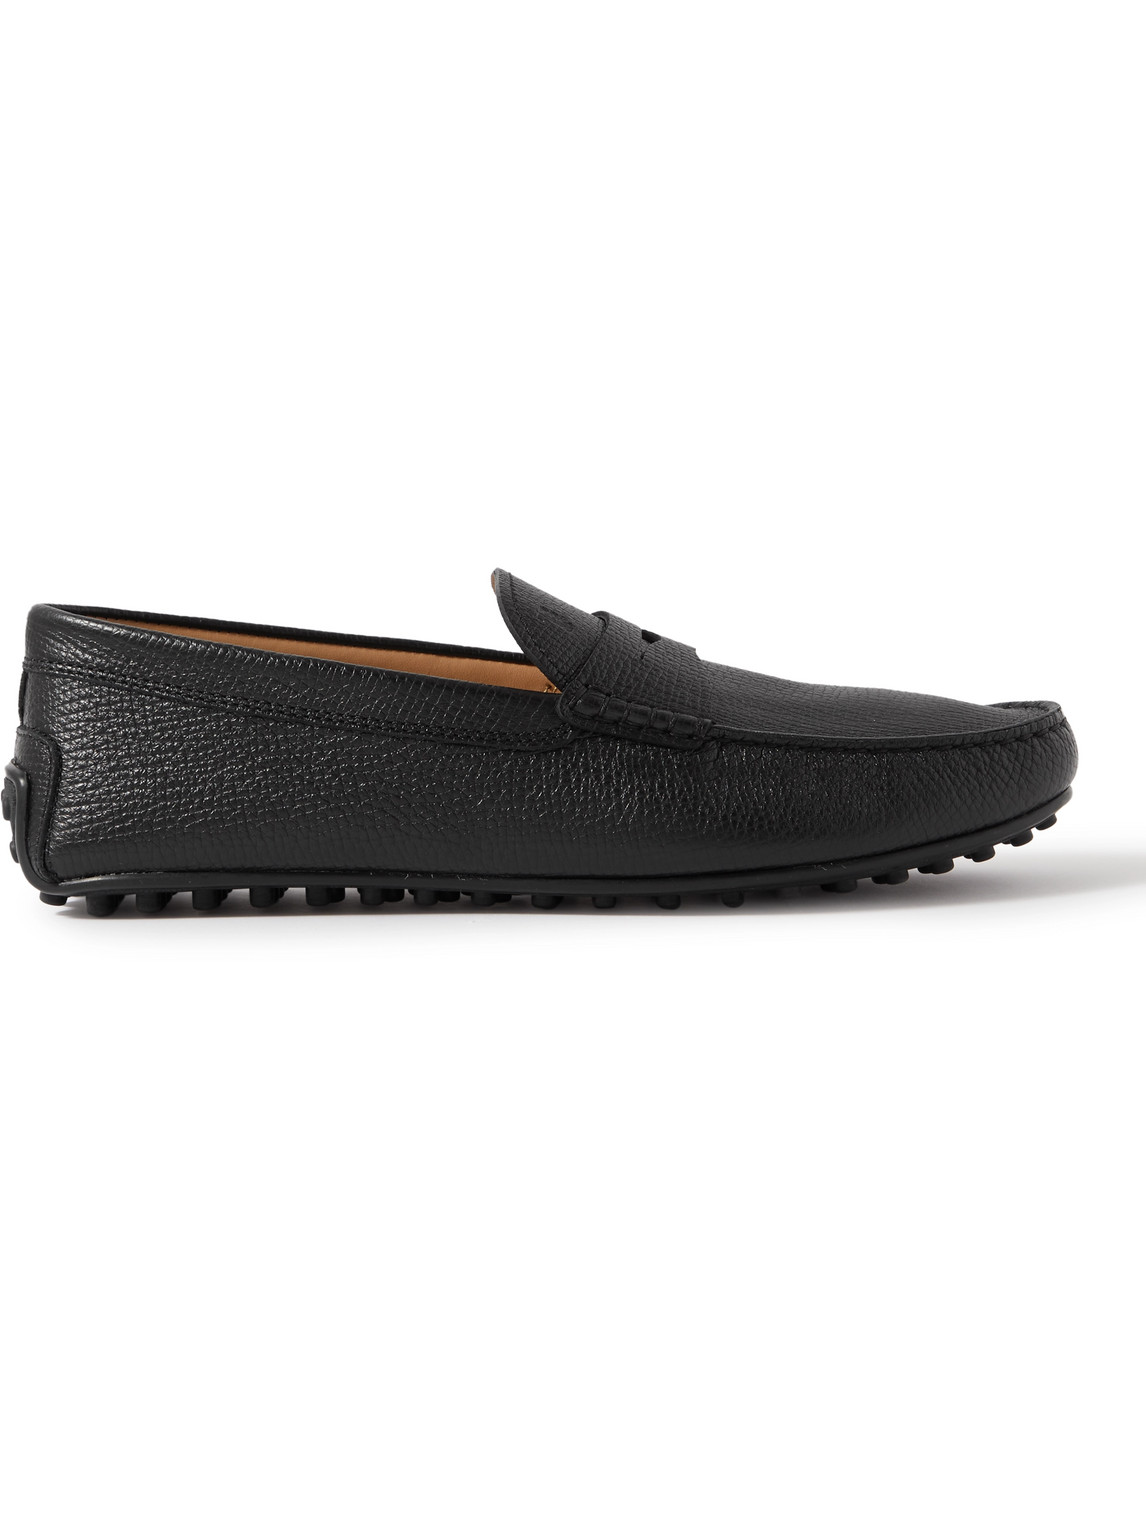 Tod's City Gommino Cross-Grain Leather Penny Loafers